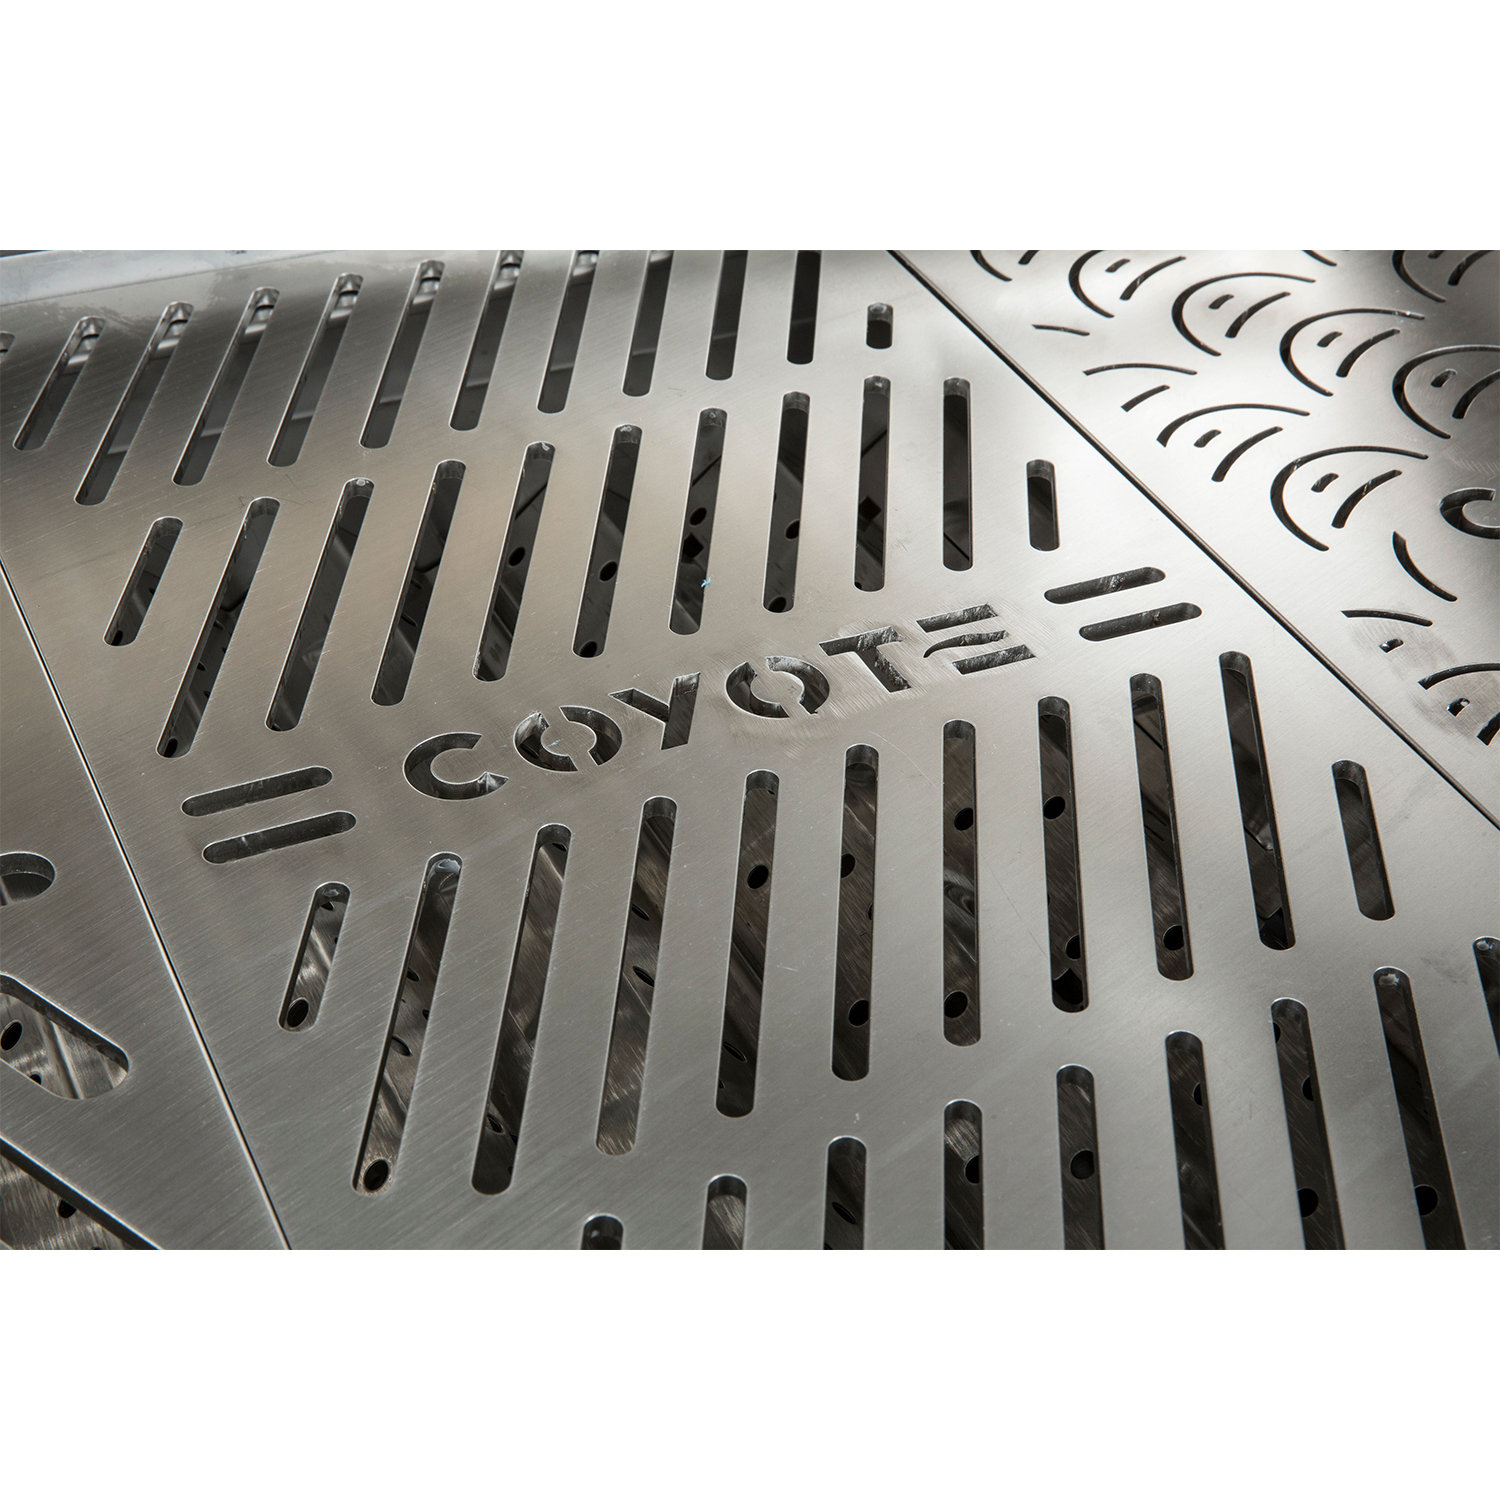 Coyote Signature Stainless Steel Laser Cut BBQ Grill Grates, Set of 3 - image 1 of 5